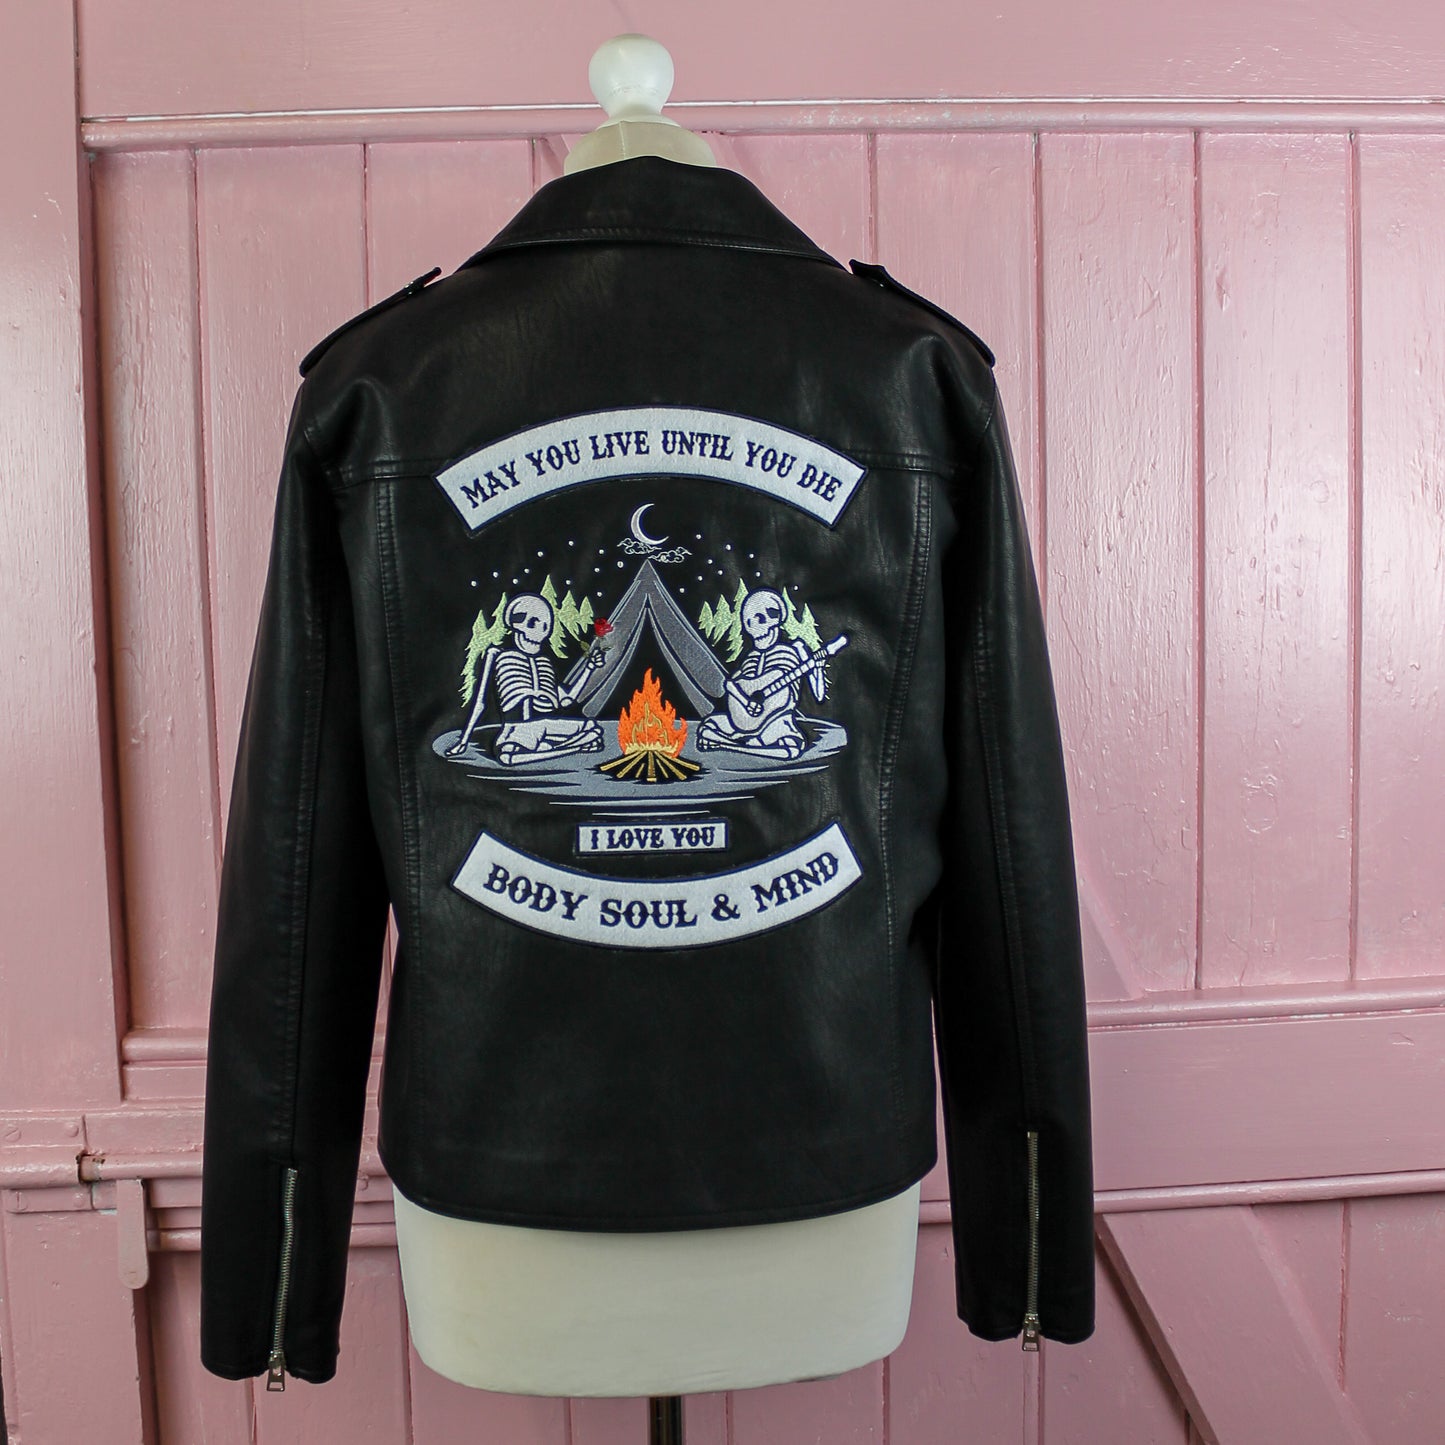 Custom embroidered leather jacket, perfect for weddings